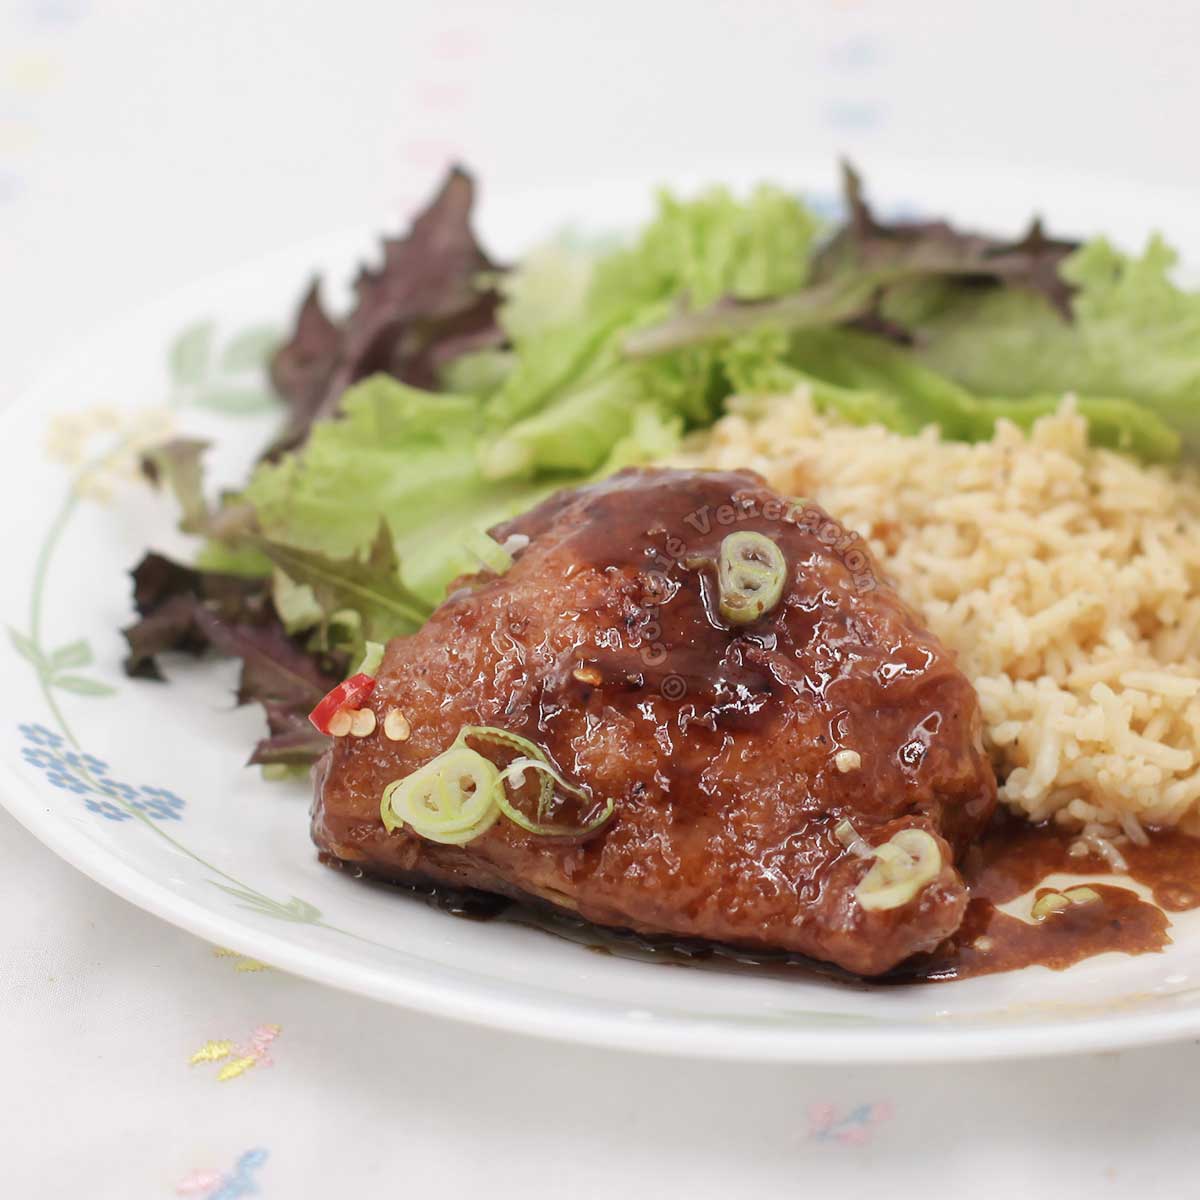 Filipino sweet sour roast chicken stew (paksiw na lechon manok) on plate with rice and side salad